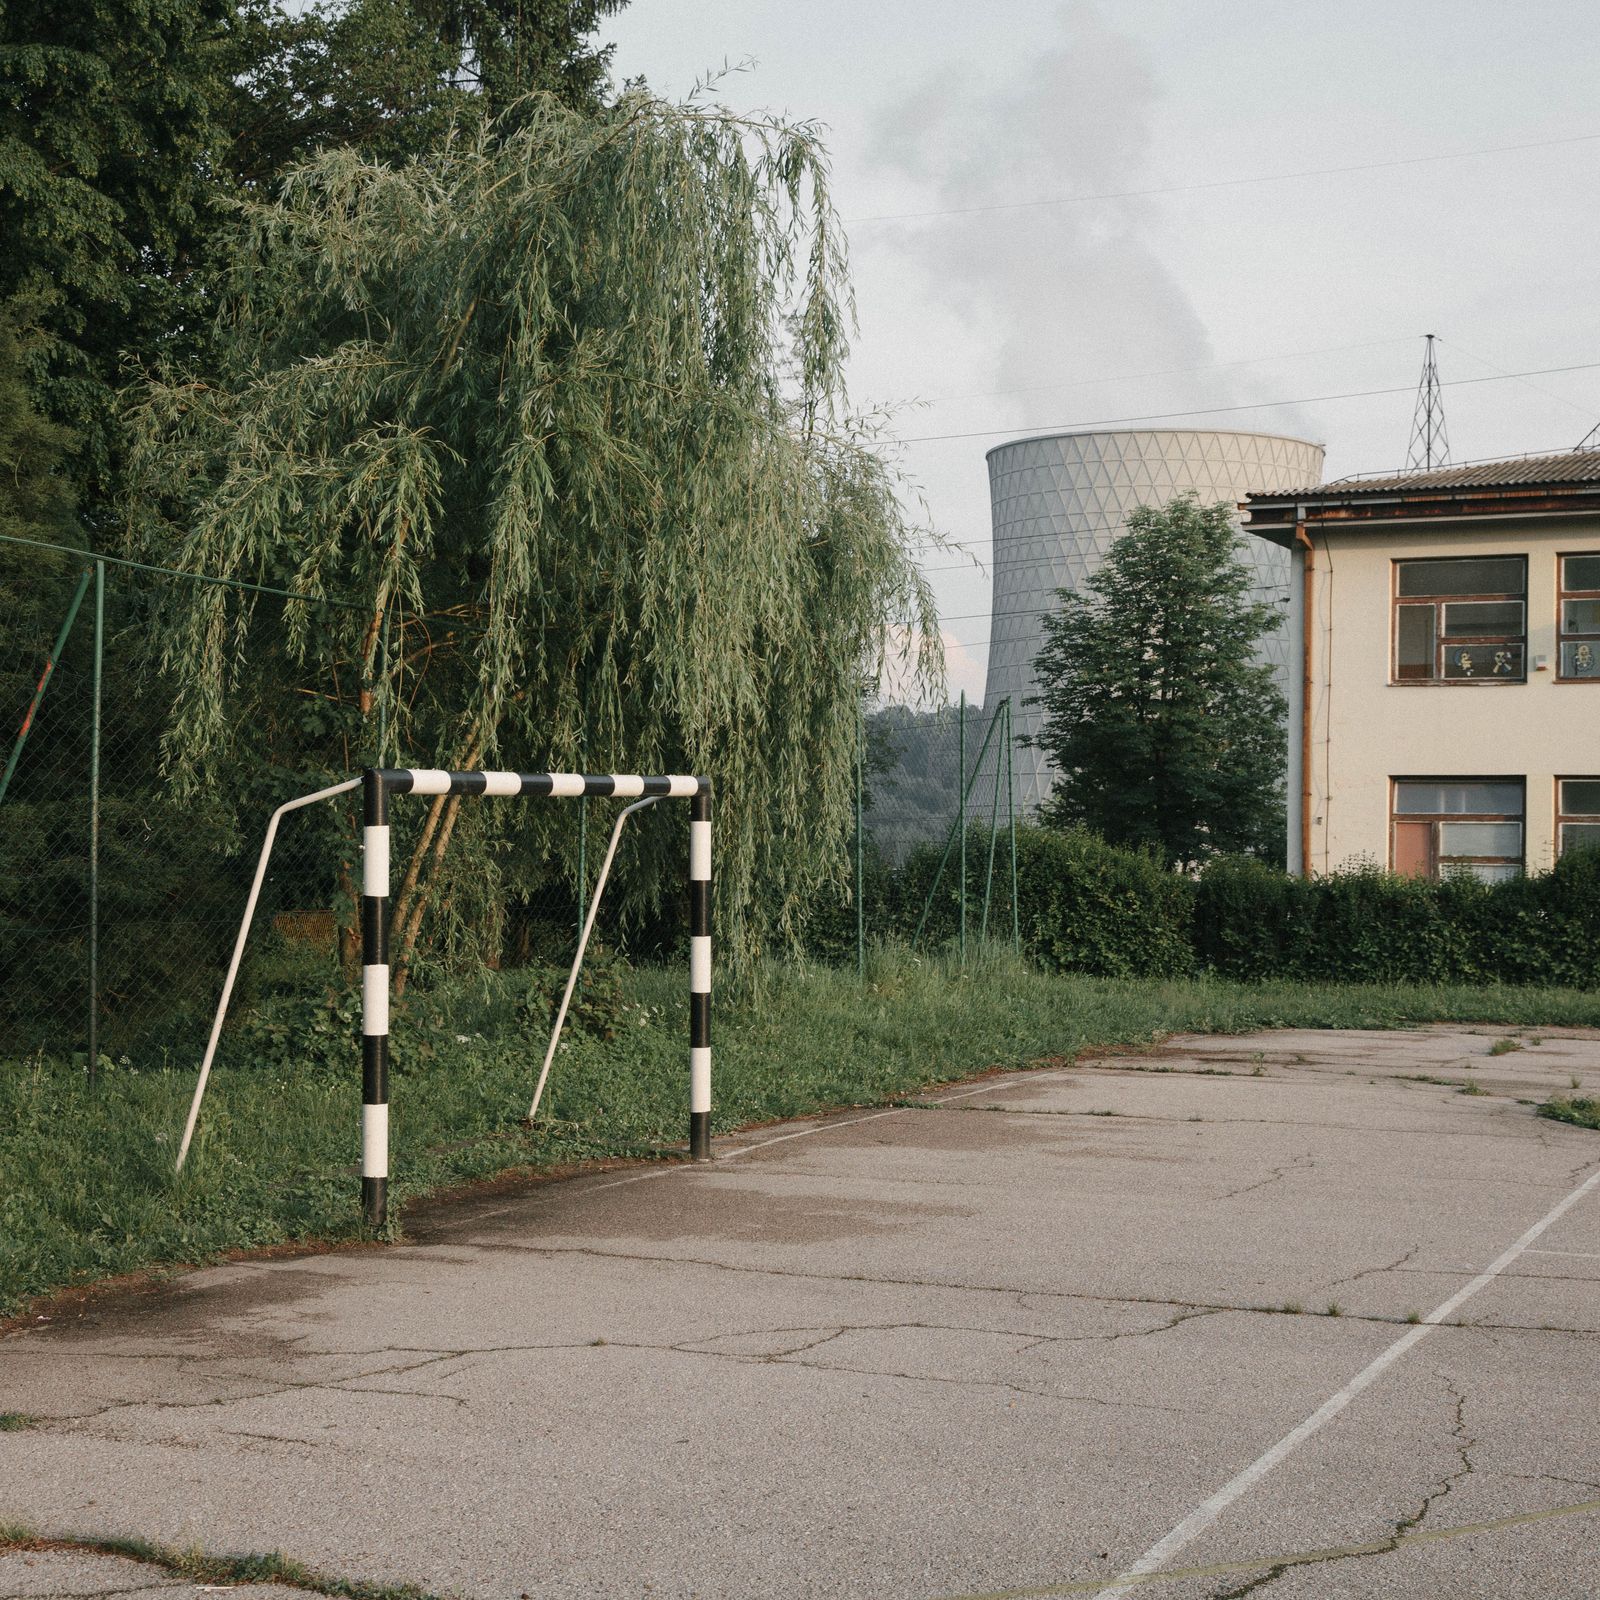 © Thomas Morsch Magnus Terhorst - The school is directly located next to the power-plant